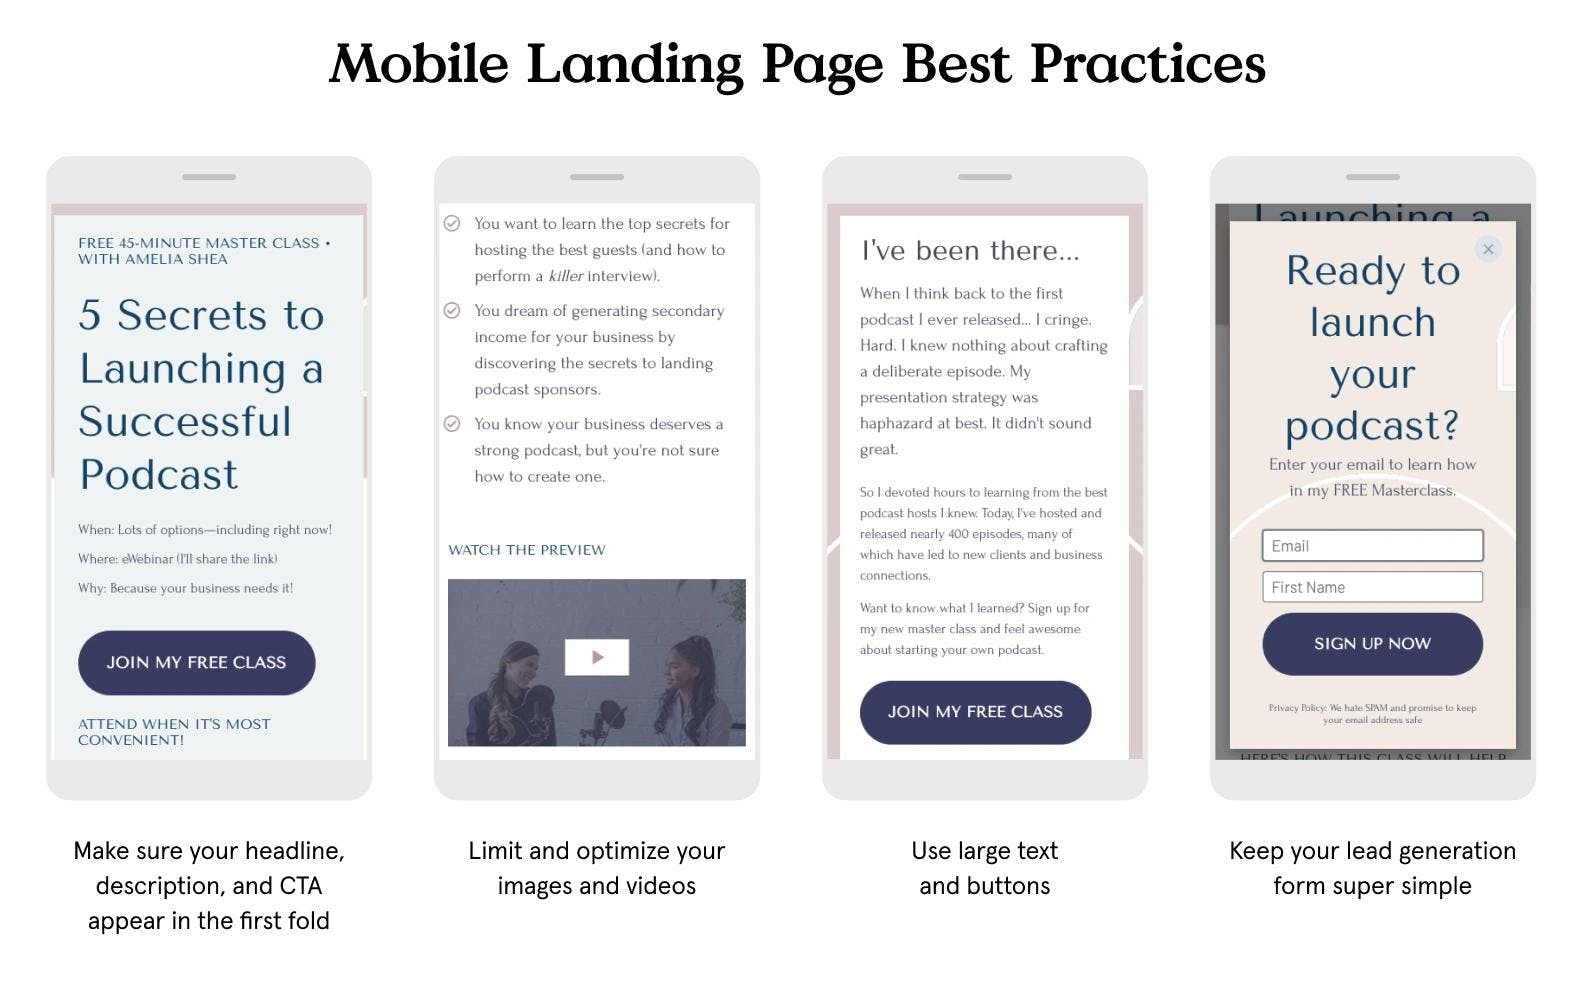 Mobile landing page best practices